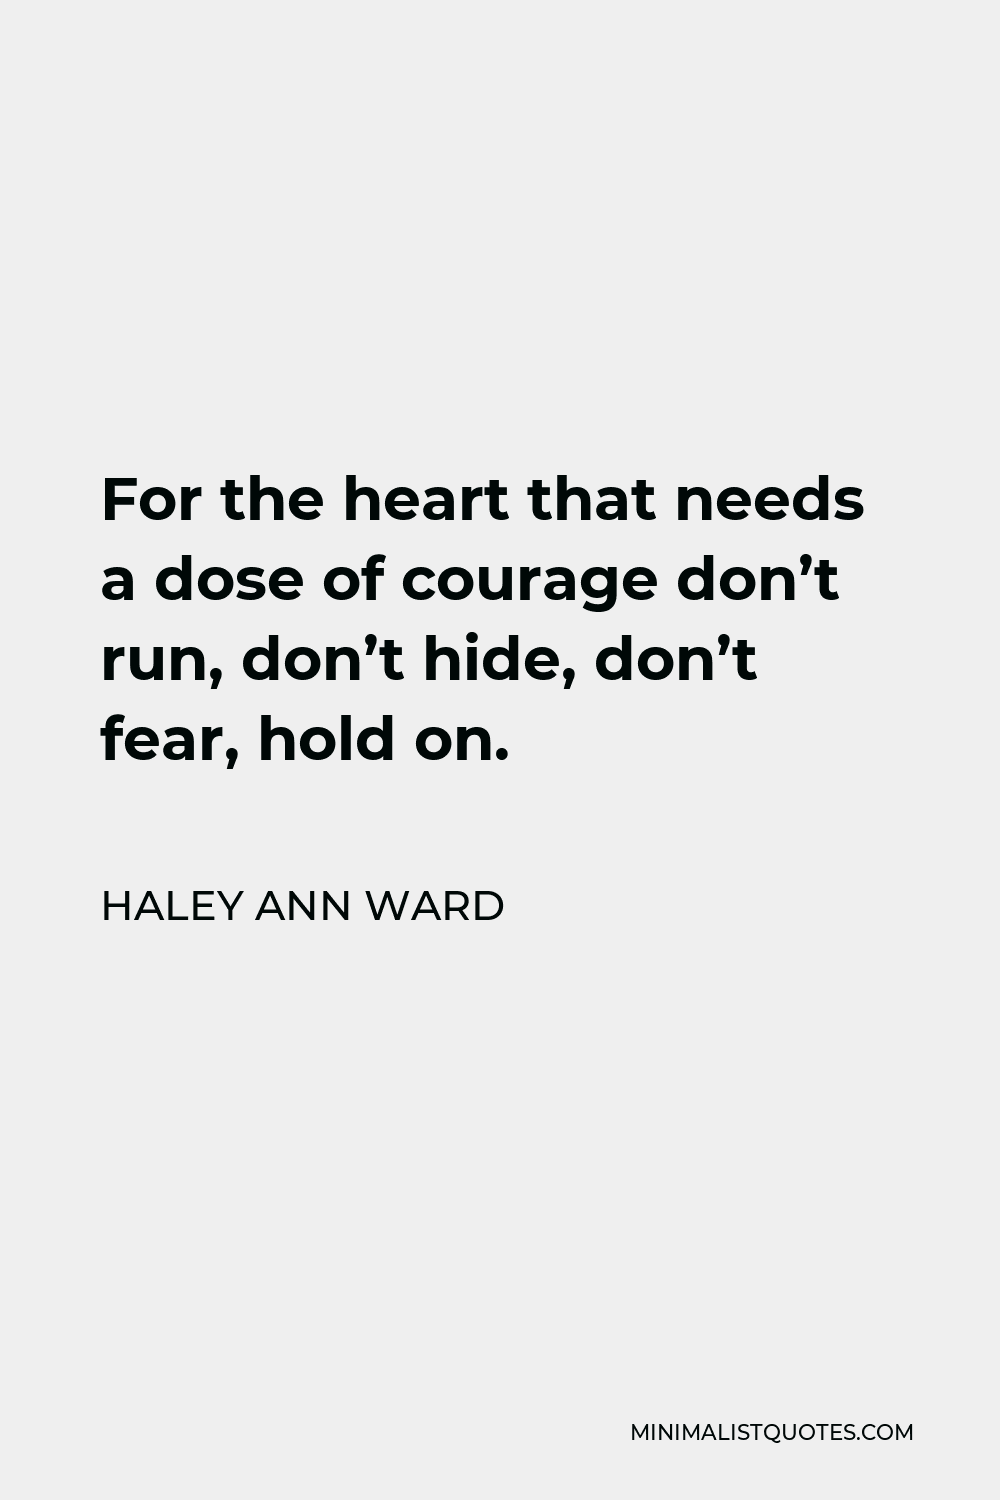 Haley Ann Ward Quote - For the heart that needs a dose of courage don’t run, don’t hide, don’t fear, hold on.